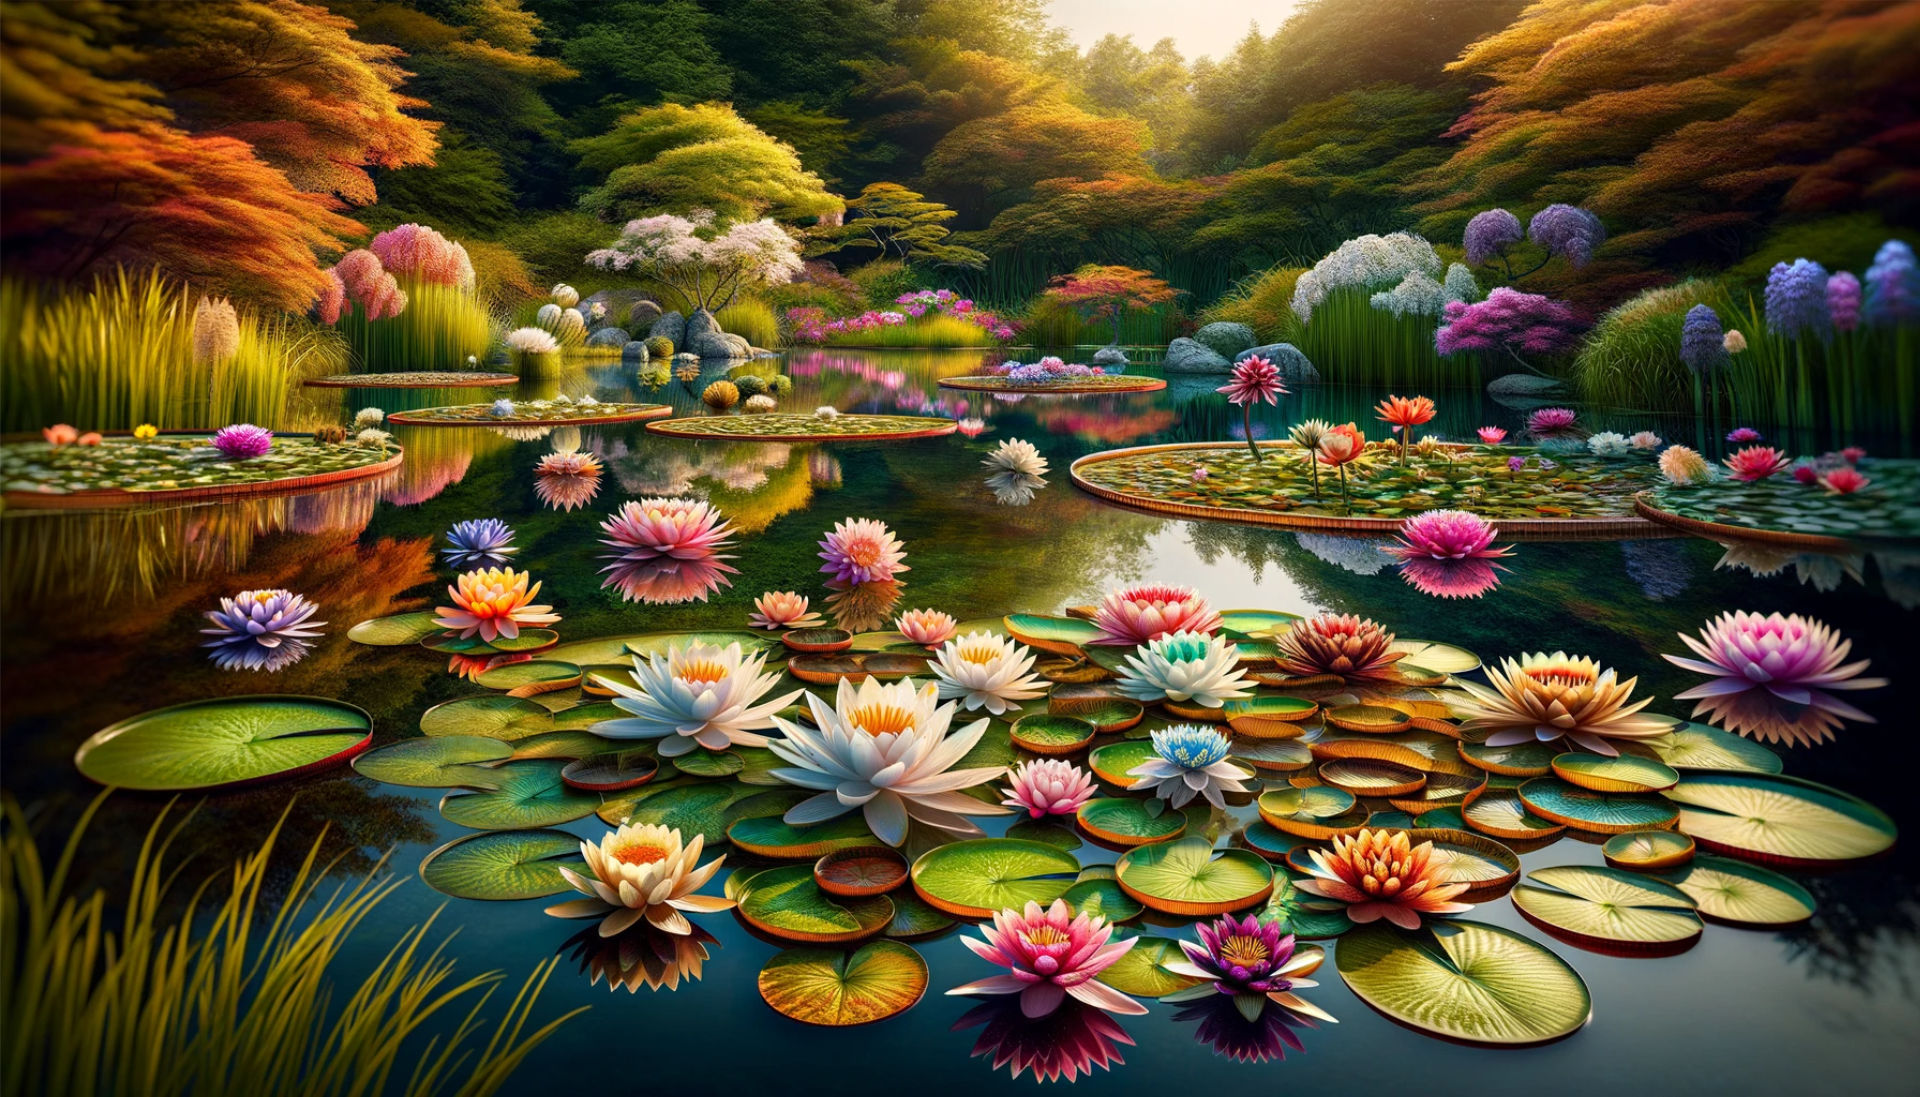 Featured Article Image: A serene pond scene with various types of water lilies in full bloom, showcasing their diversity in colors and sizes. The image captures the tranquil atmosphere they create, with reflections on the water's surface, surrounded by lush greenery.